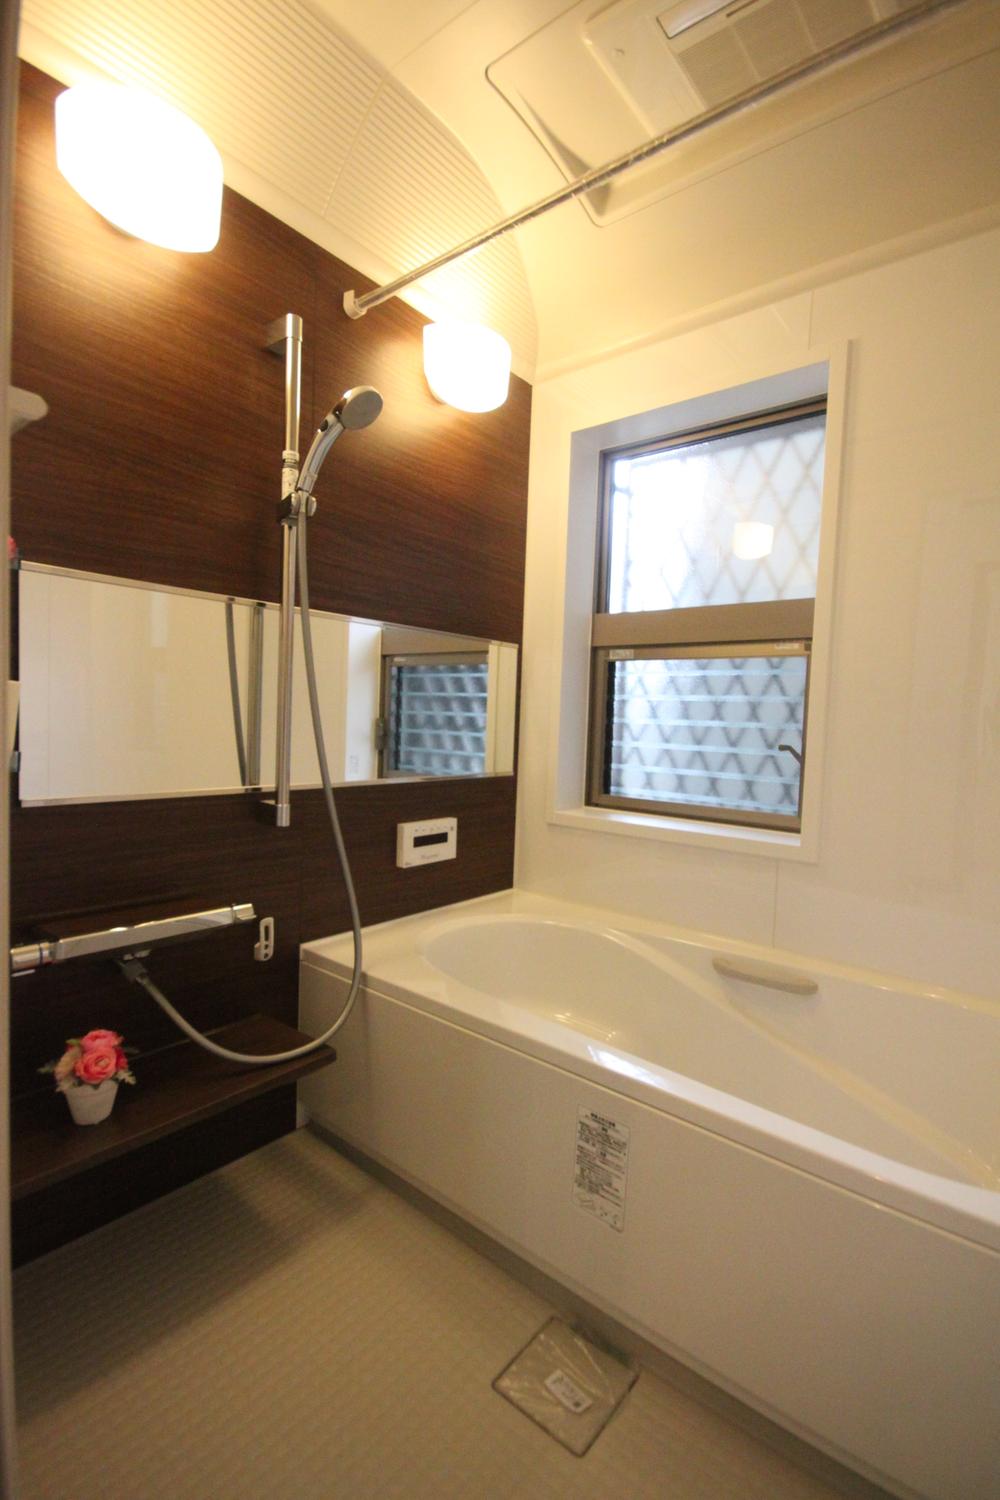 Bathroom. From the bath time of the whole family, To loose the healing time of your own, It is wide specification designed to be used freely. The everywhere of this limited bus space, Chock comfortable your able element